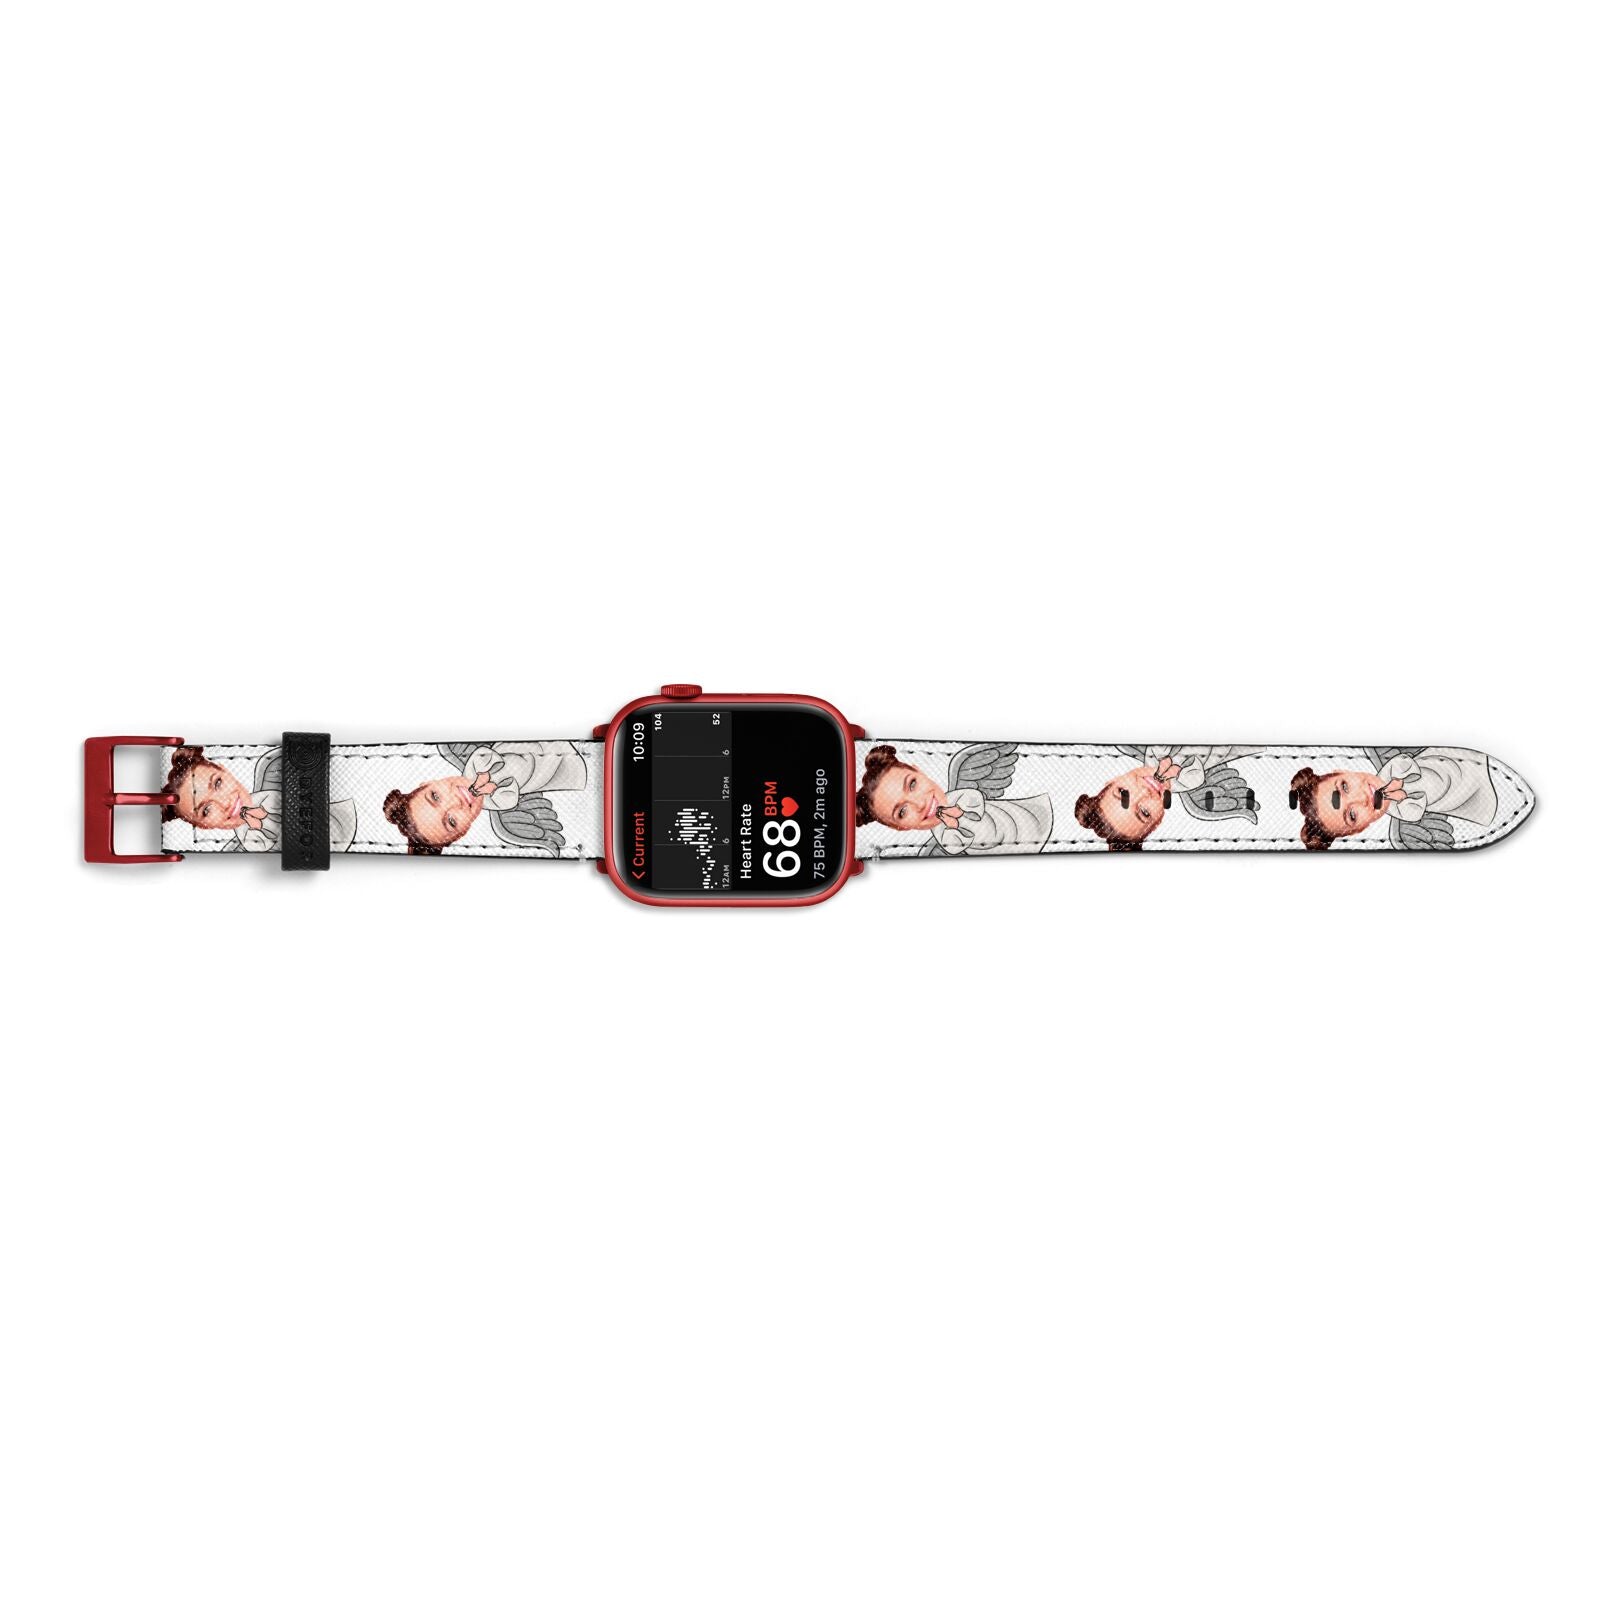 Angel Photo Face Apple Watch Strap Size 38mm Landscape Image Red Hardware